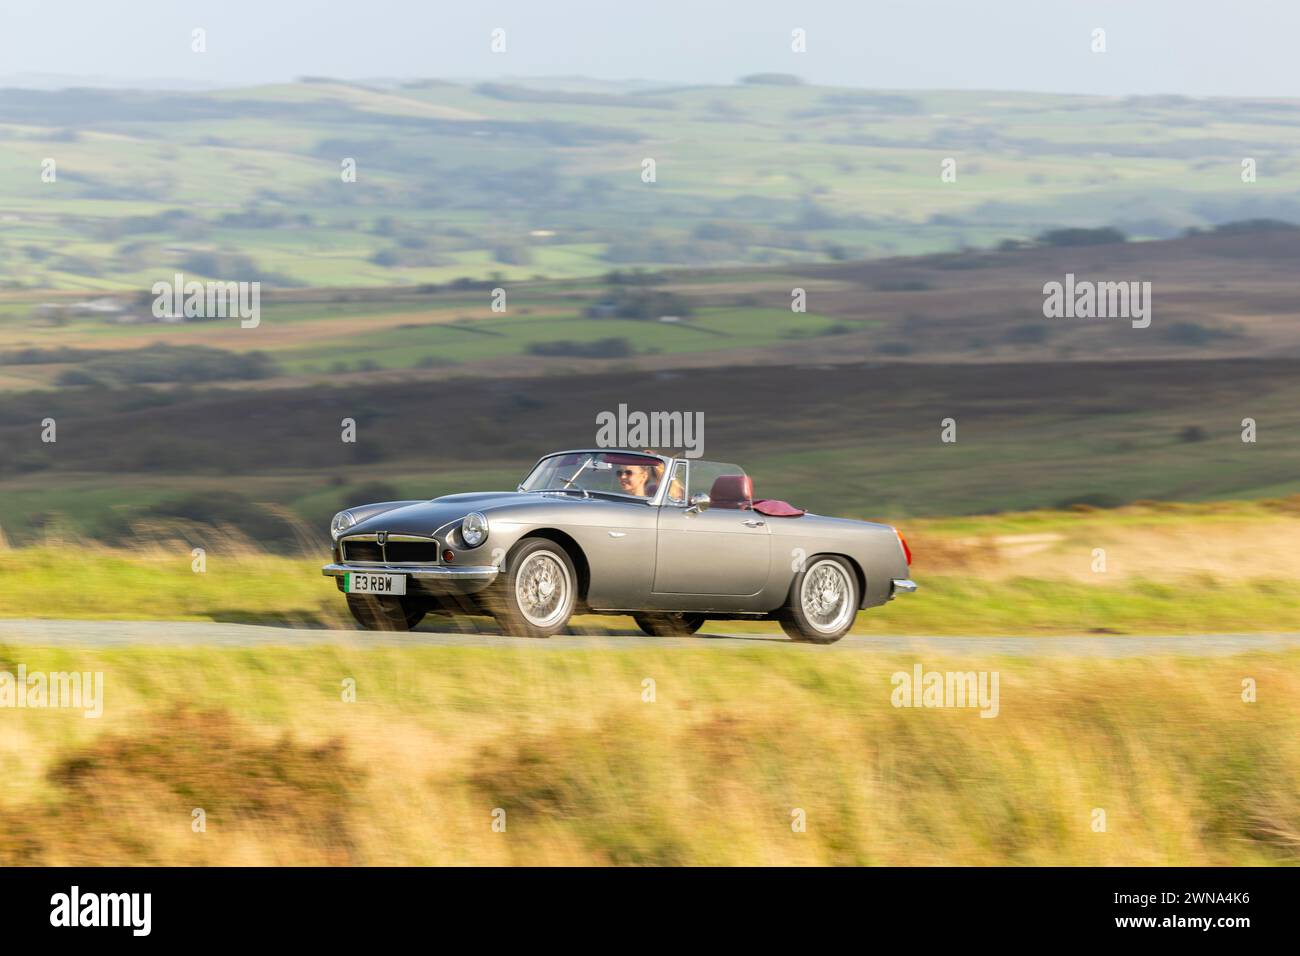 File Photo  Electric RBW Roadster. The battery powered classic car is built at the company’s HQ in Lichfield, Staffordshire, UK. It is a ground up new Stock Photo